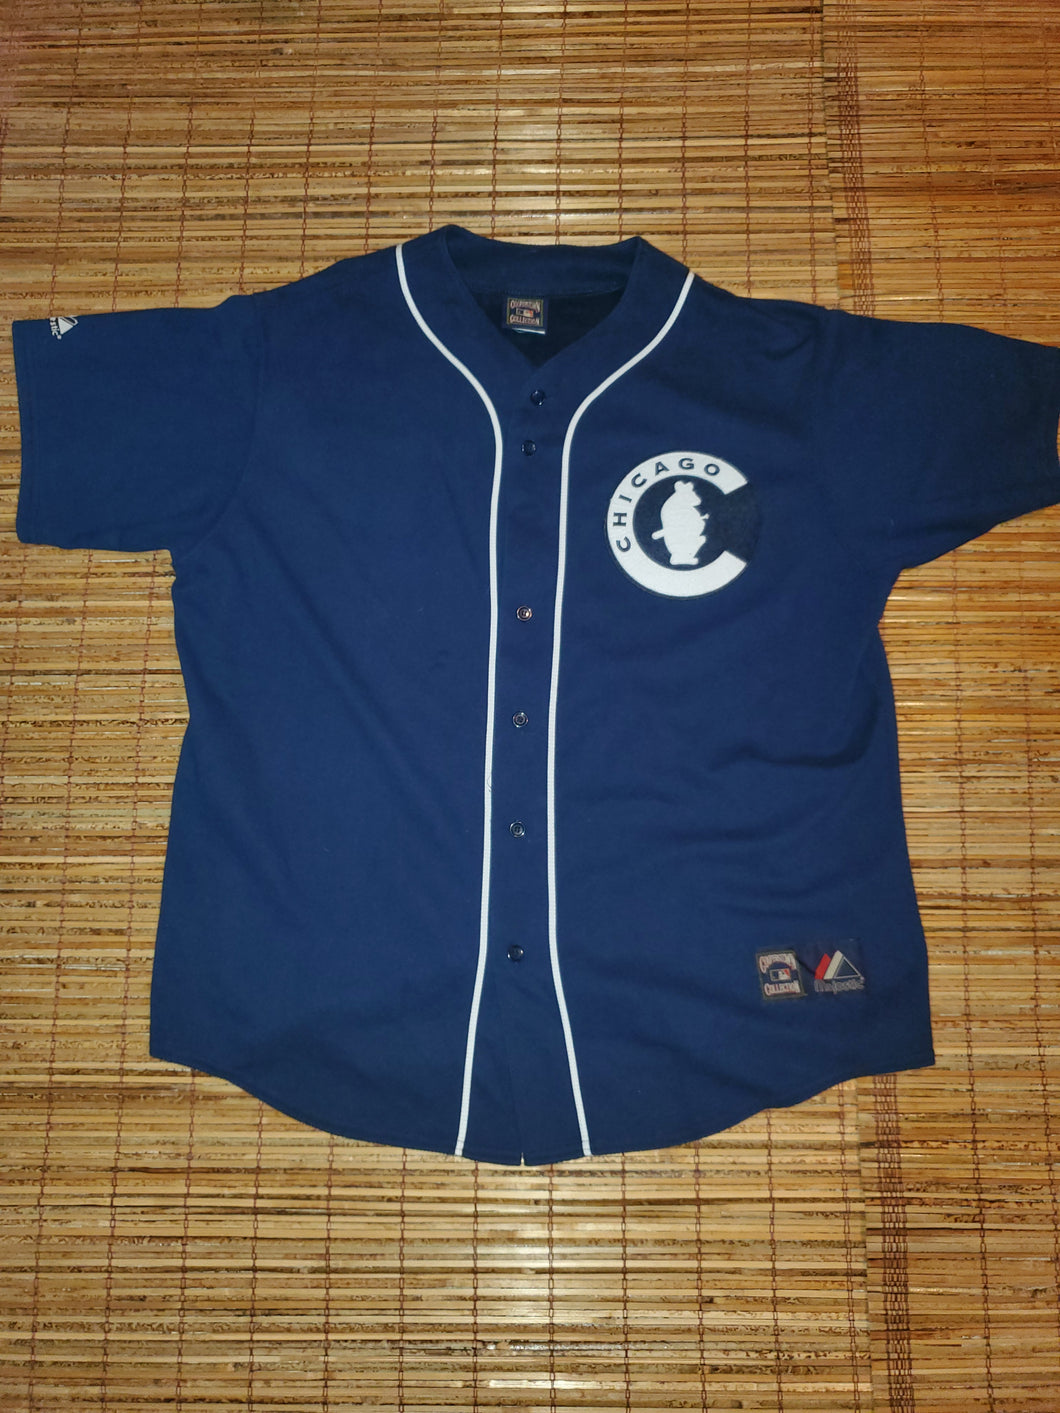 1908 chicago cubs jersey